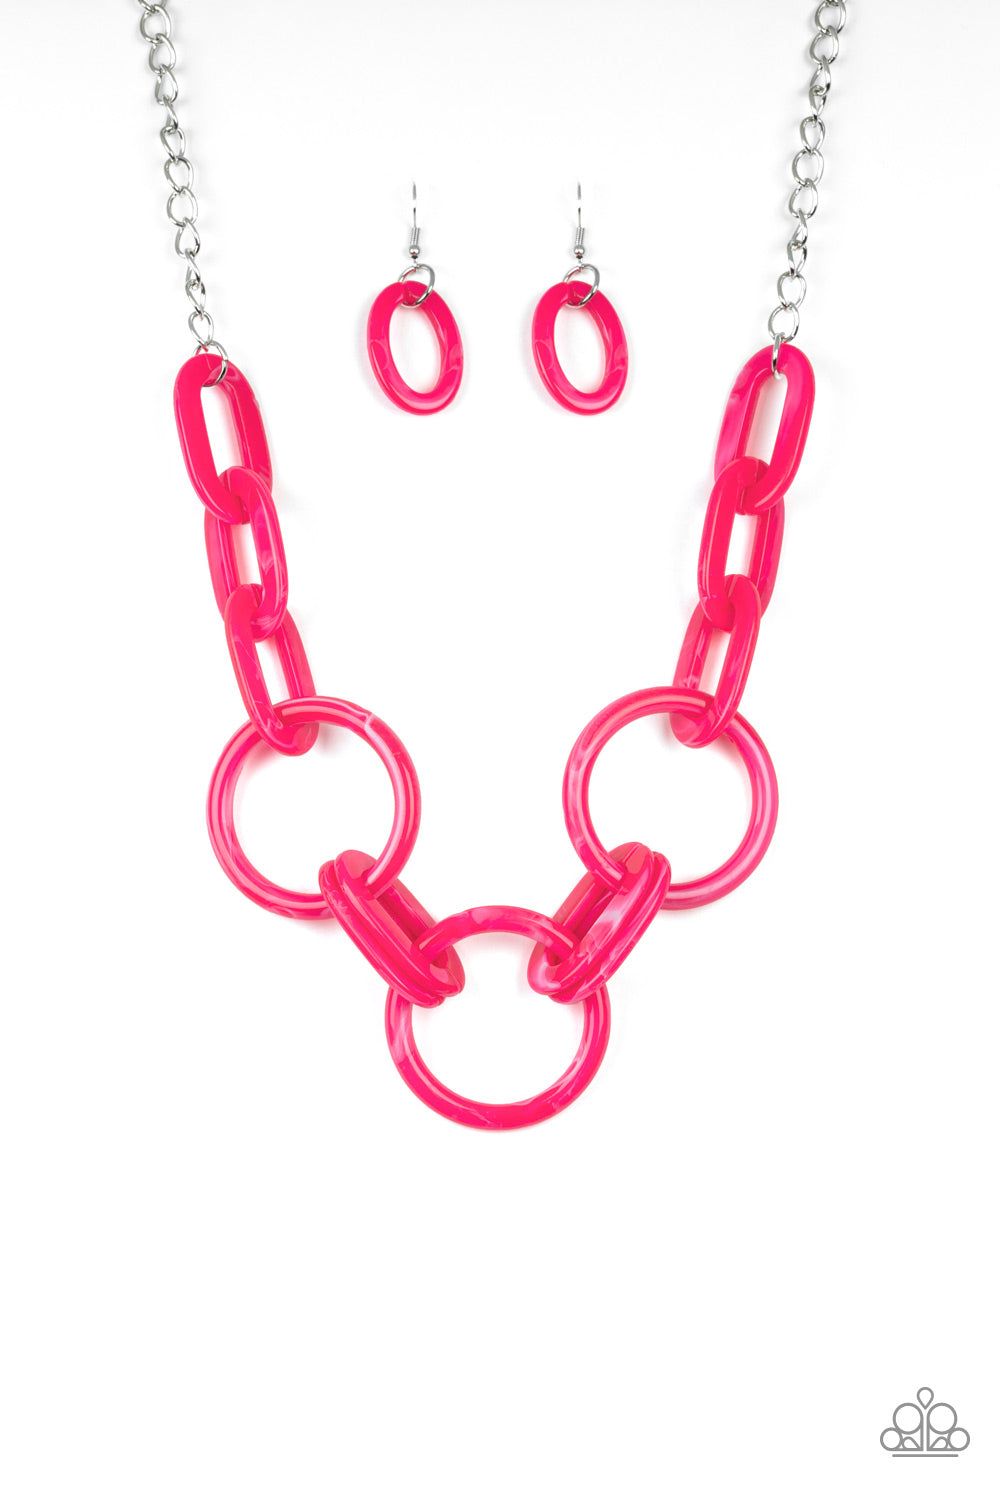 Turn Up The Heat - Pink necklace set